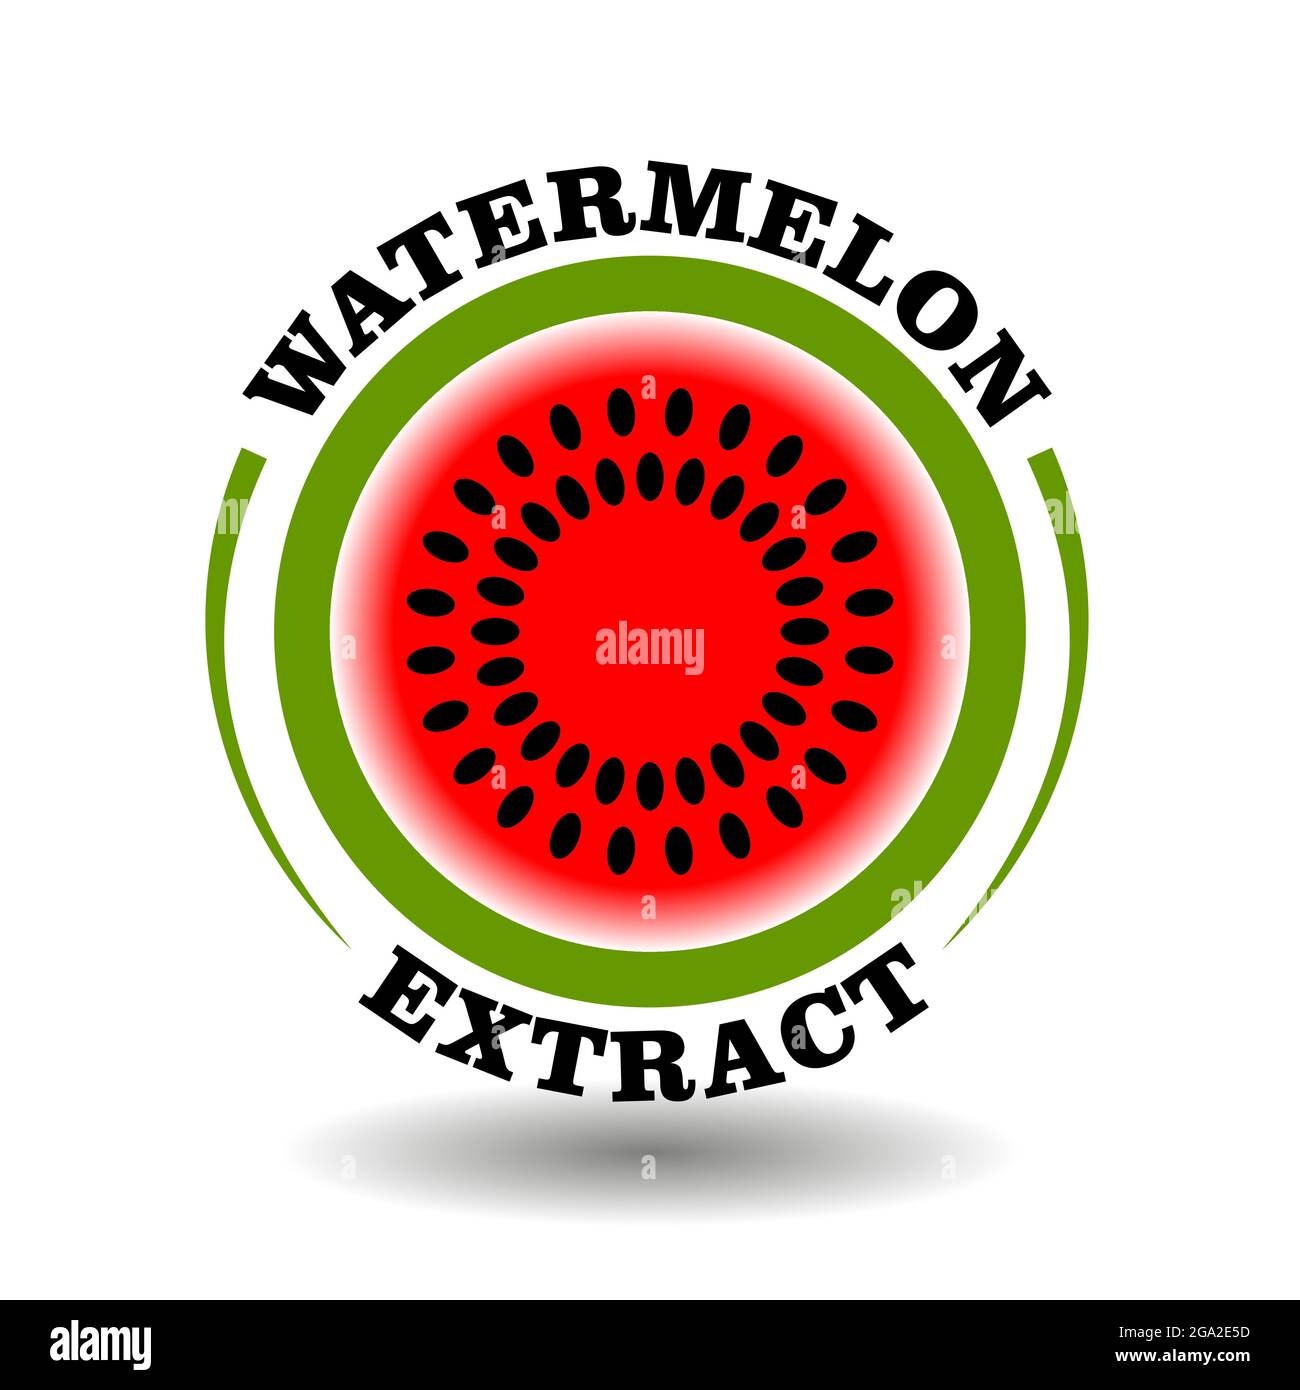 Creative circle logo Watermelon with round half cut of fruit slice icon and circle seeds symbol for labeling product contain natural organic water mel Stock Vector